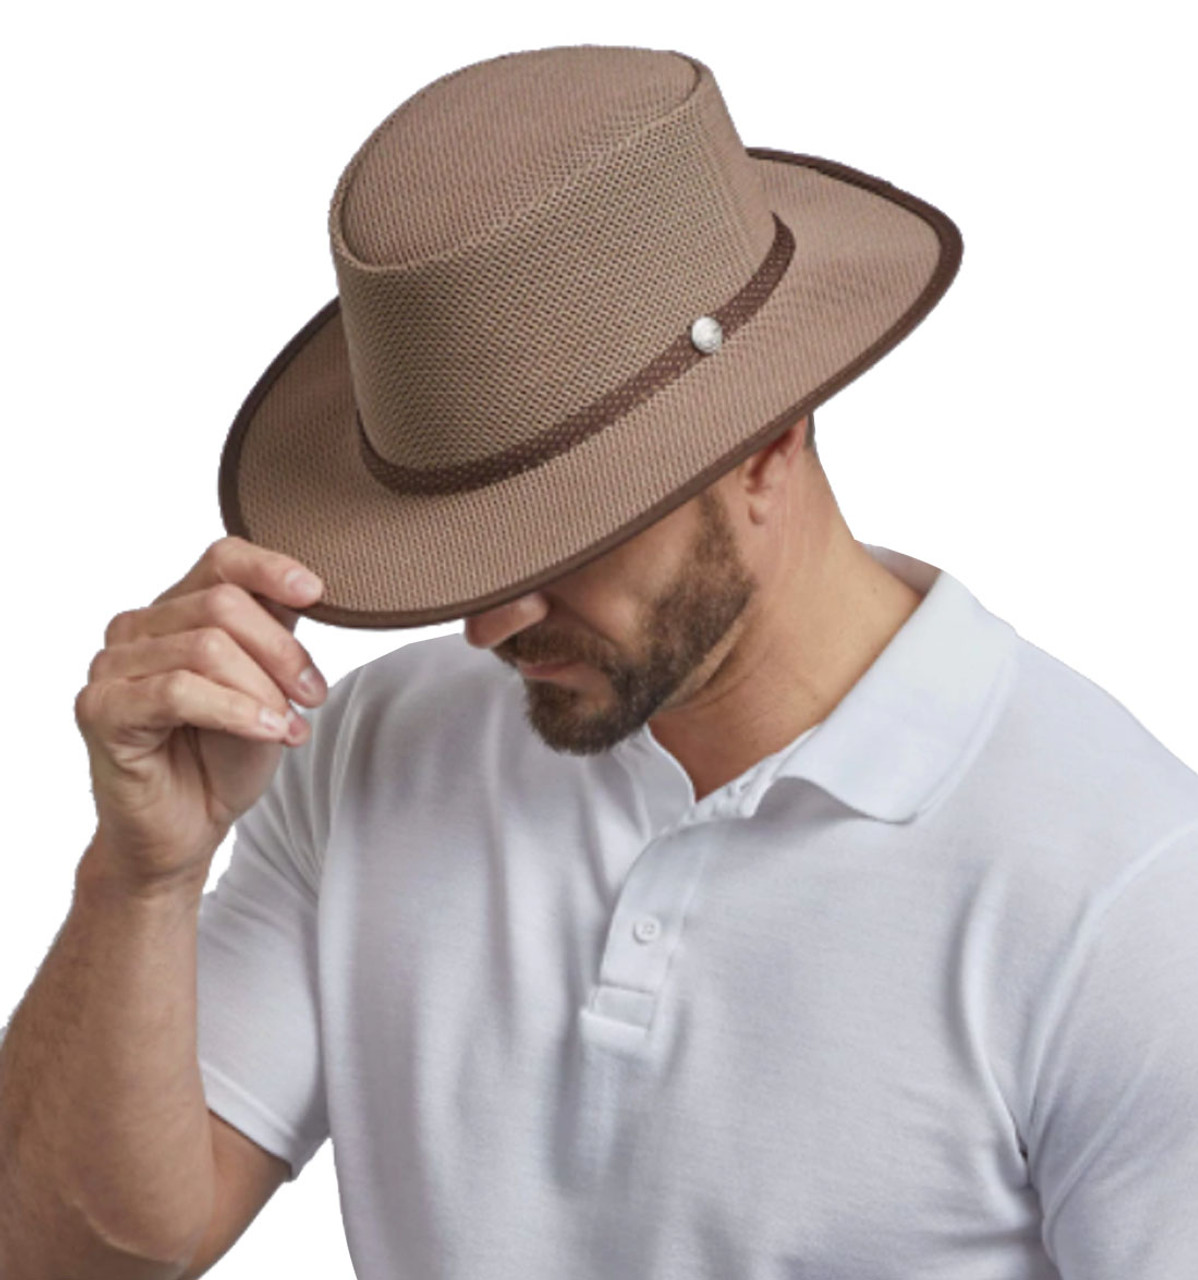 Cabana Wide Brim Men's Breathable Sun Hat by American Hat Makers